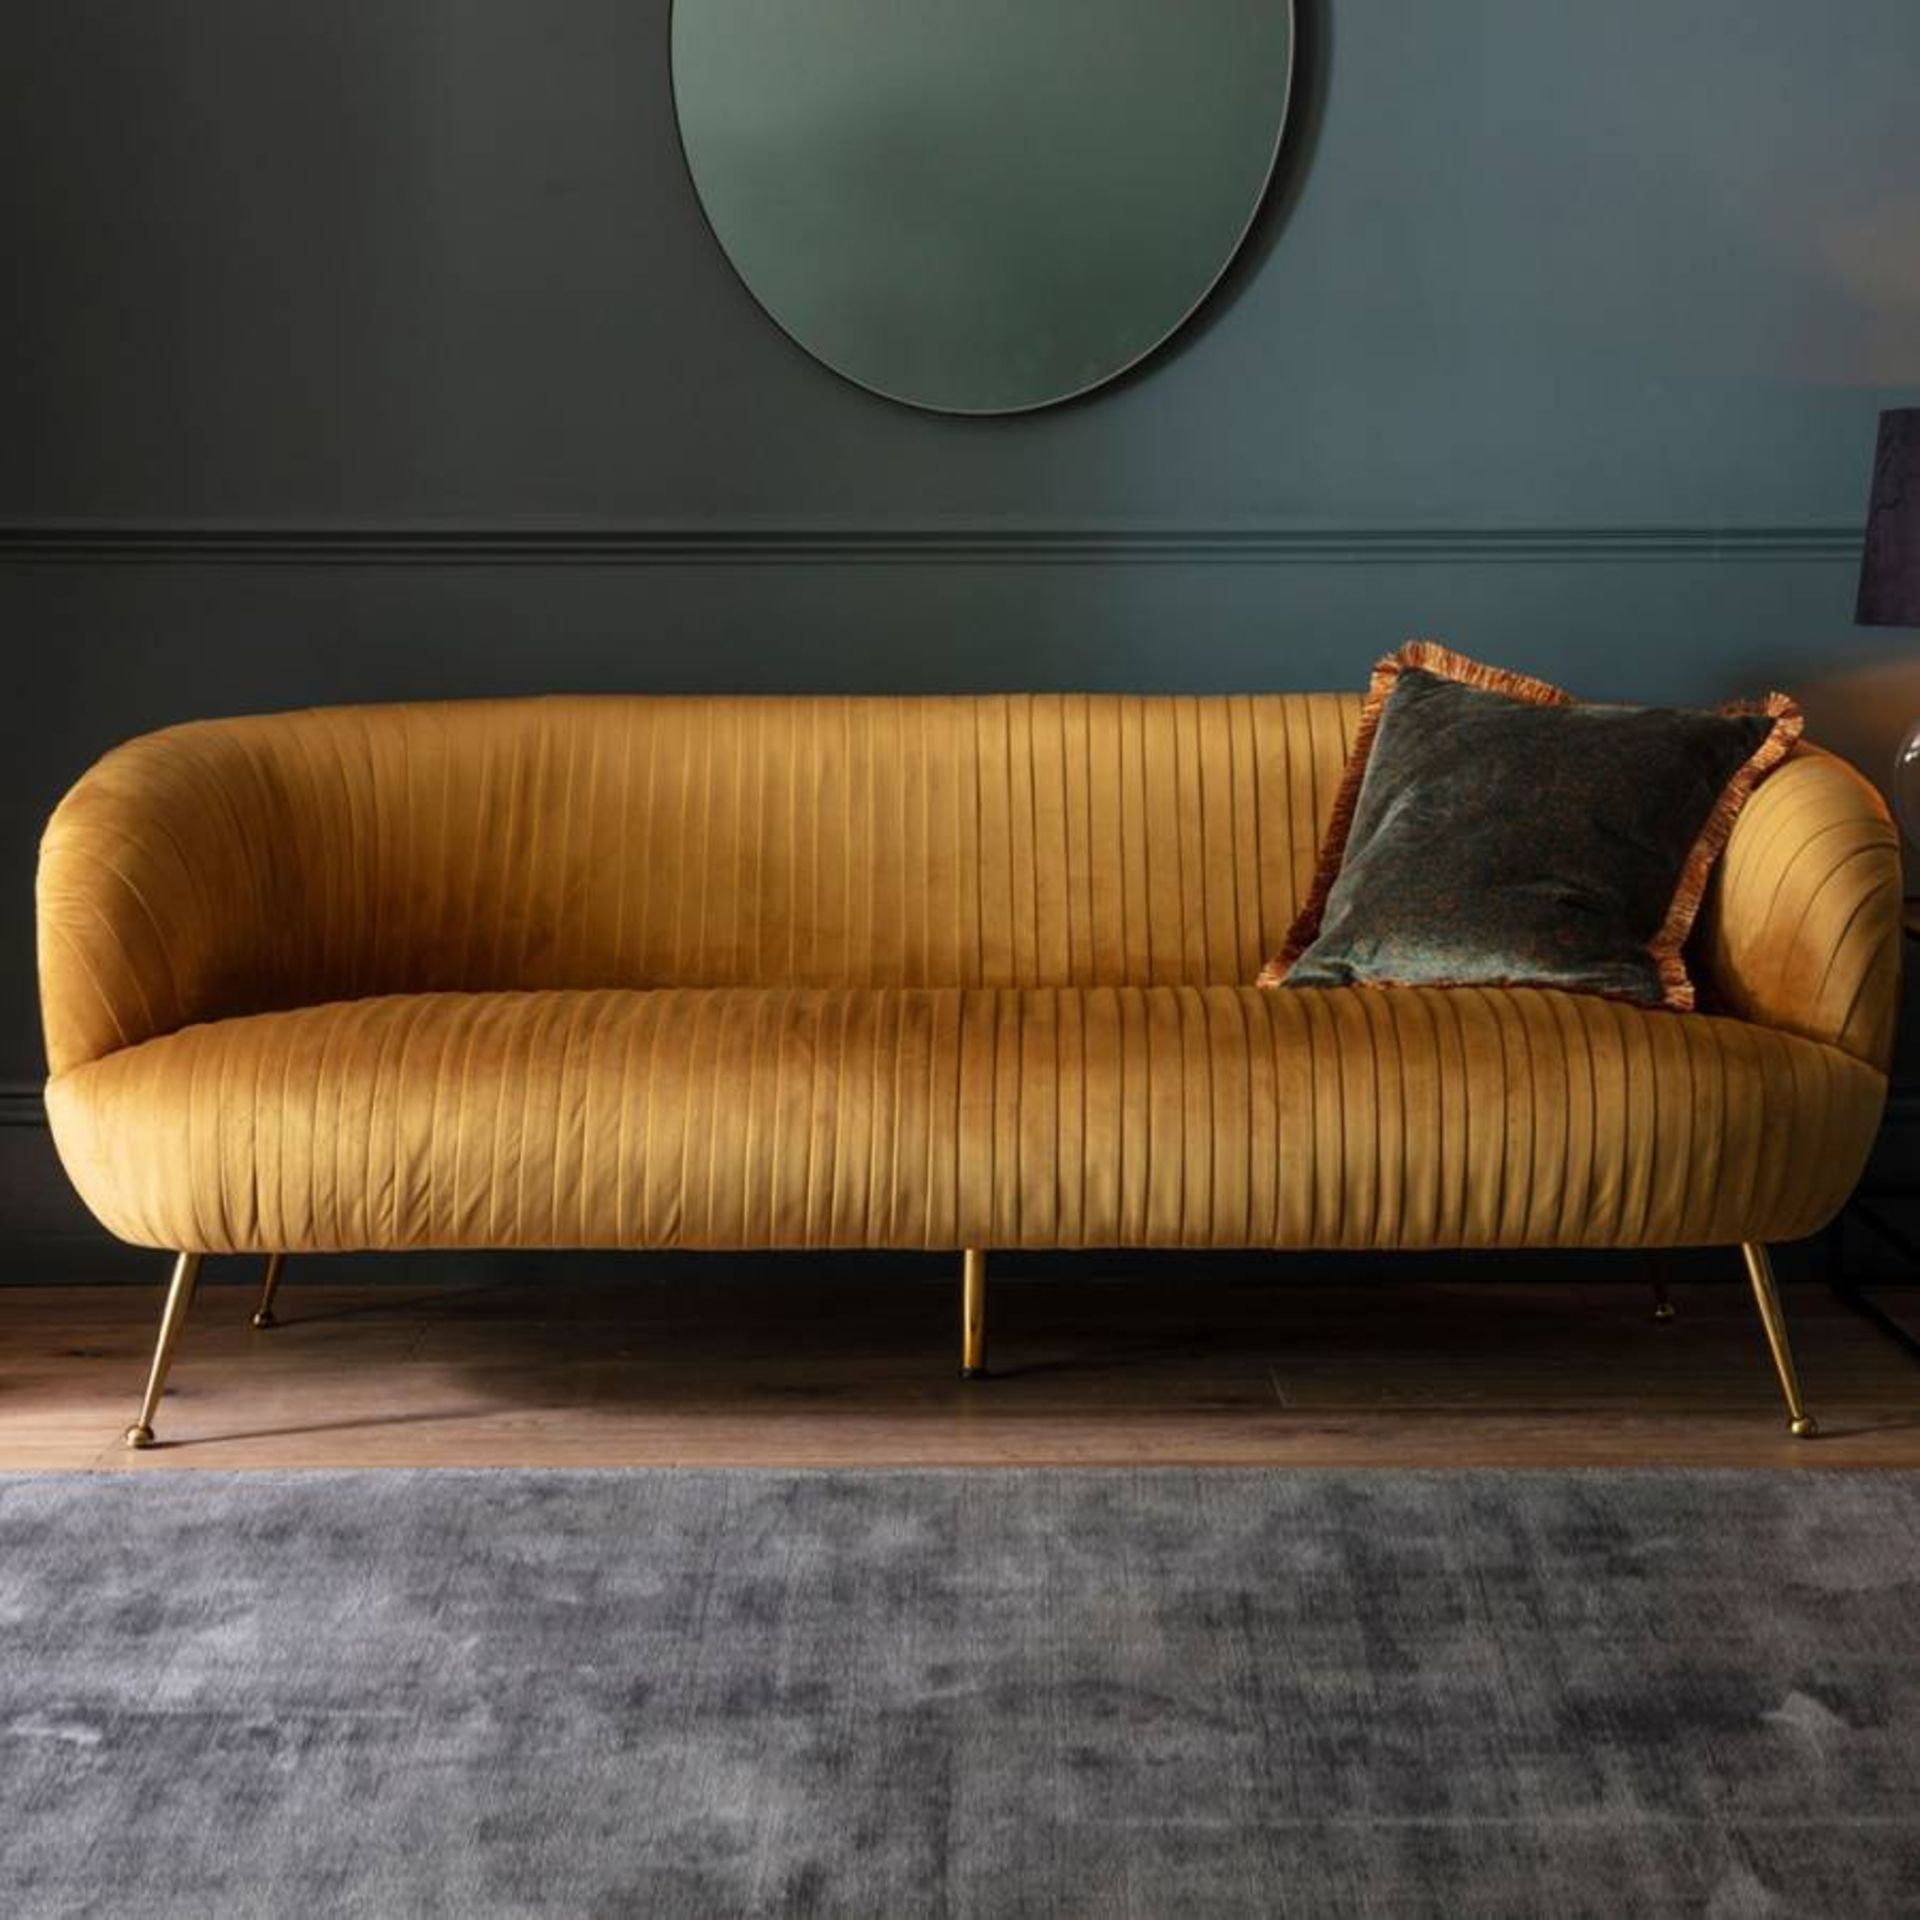 Valenza Gold Sofa Sit in style and make this Valenza Gold Velvet Sofa a focal piece of your living